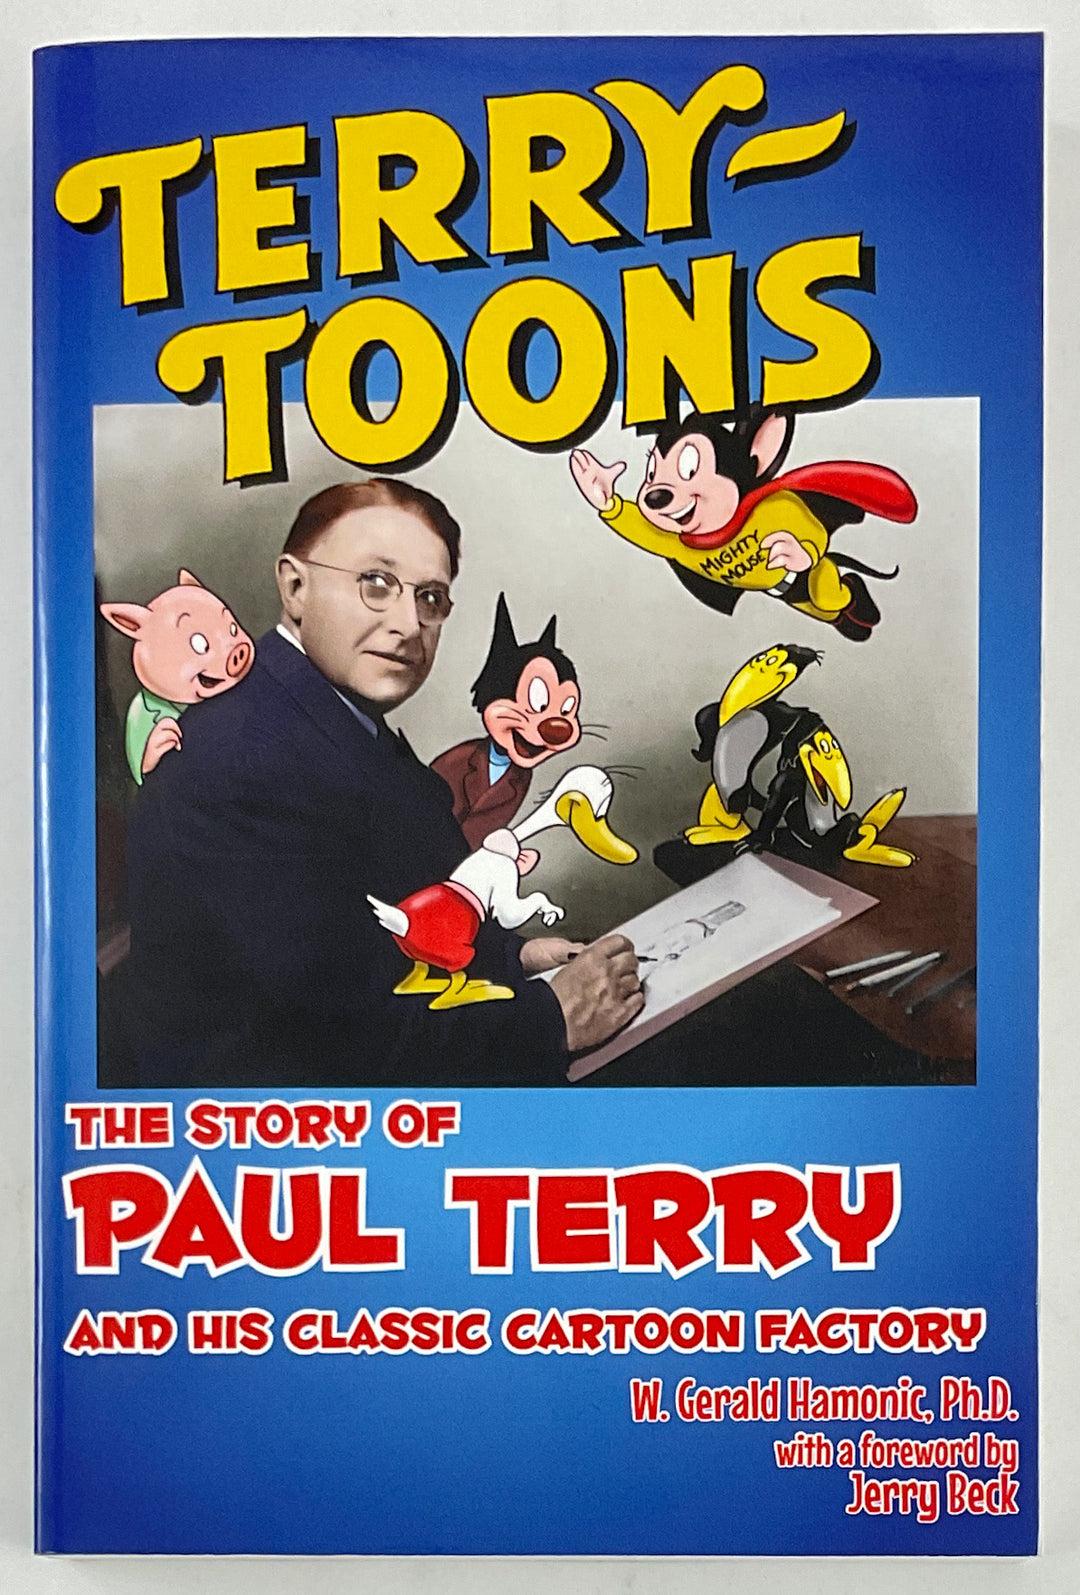 Terrytoons: The Story of Paul Terry and His Classic Cartoon Factory